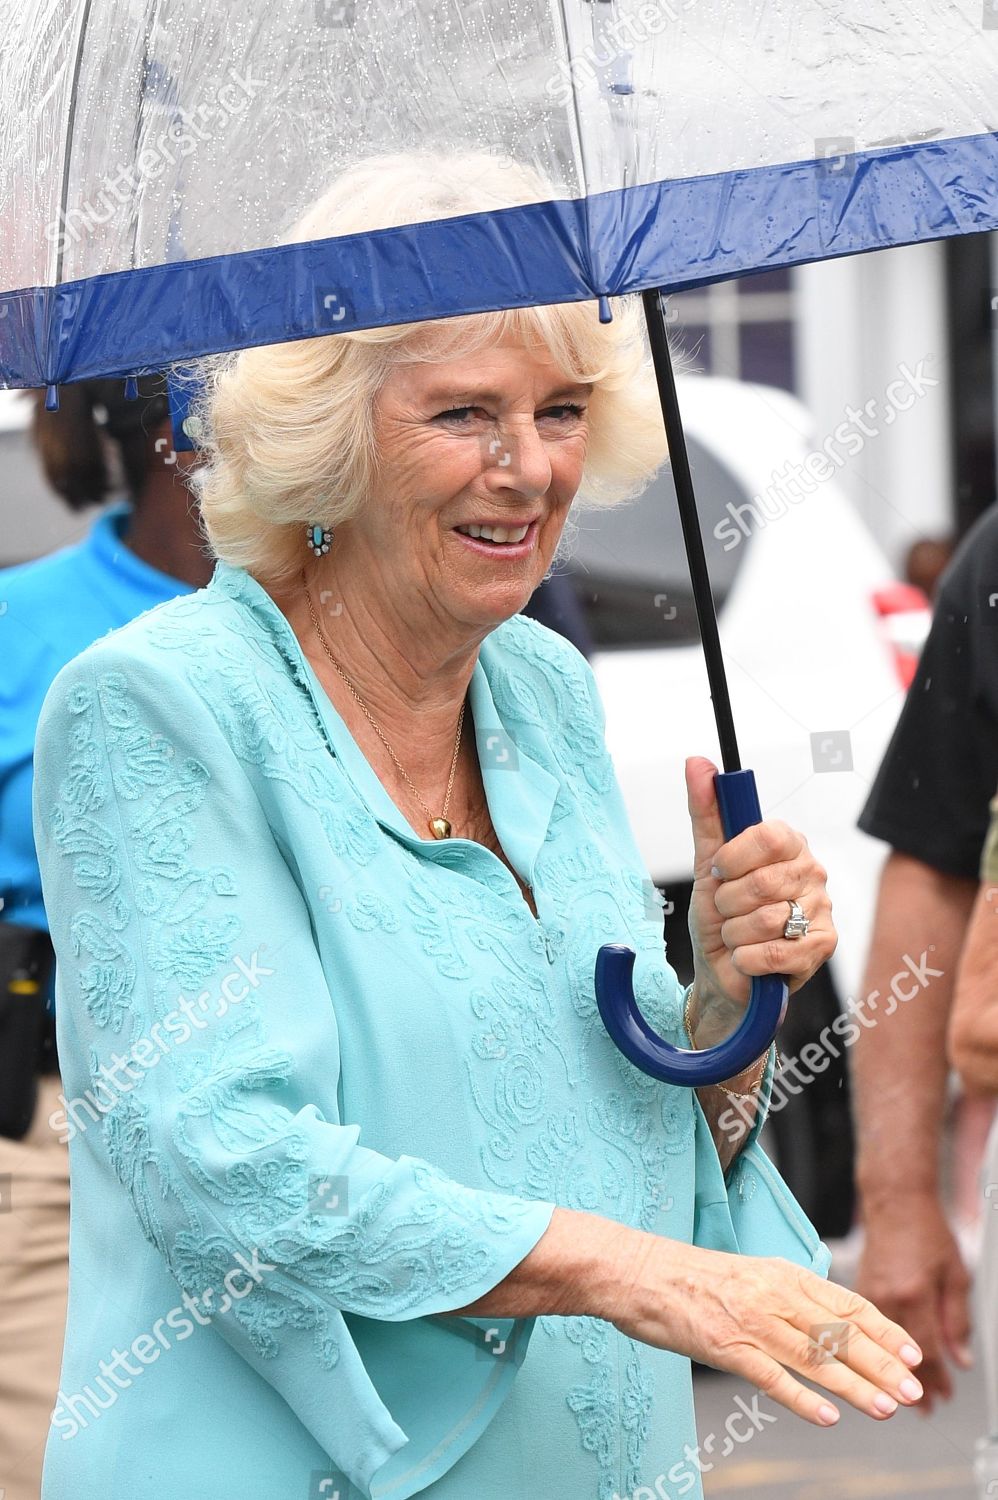 prince-charles-and-camilla-duchess-of-cornwall-caribbean-tour-st-kitts-and-nevis-shutterstock-editorial-10163031as.jpg